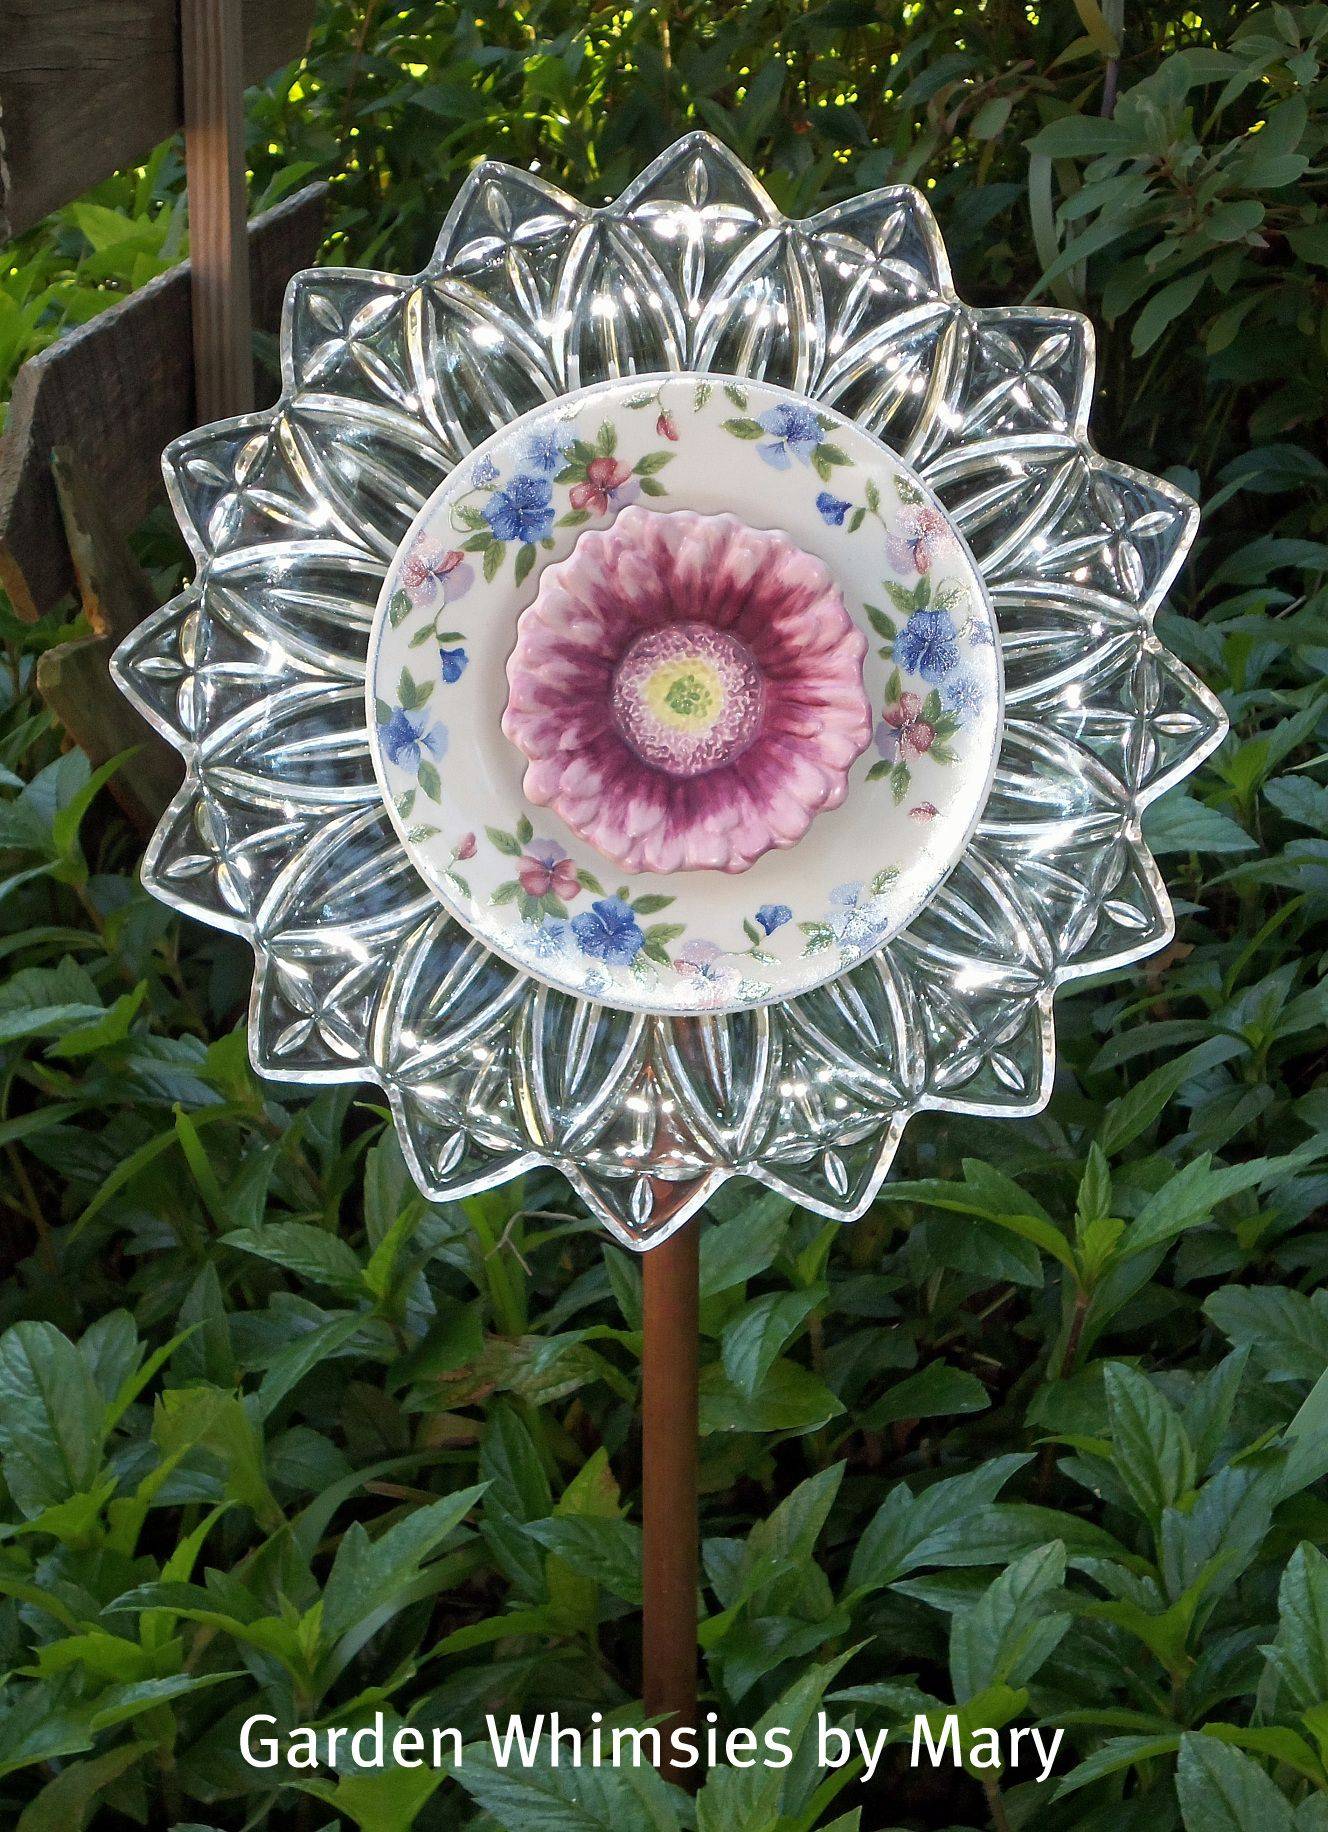 Upcycled Garden Glass Flowers